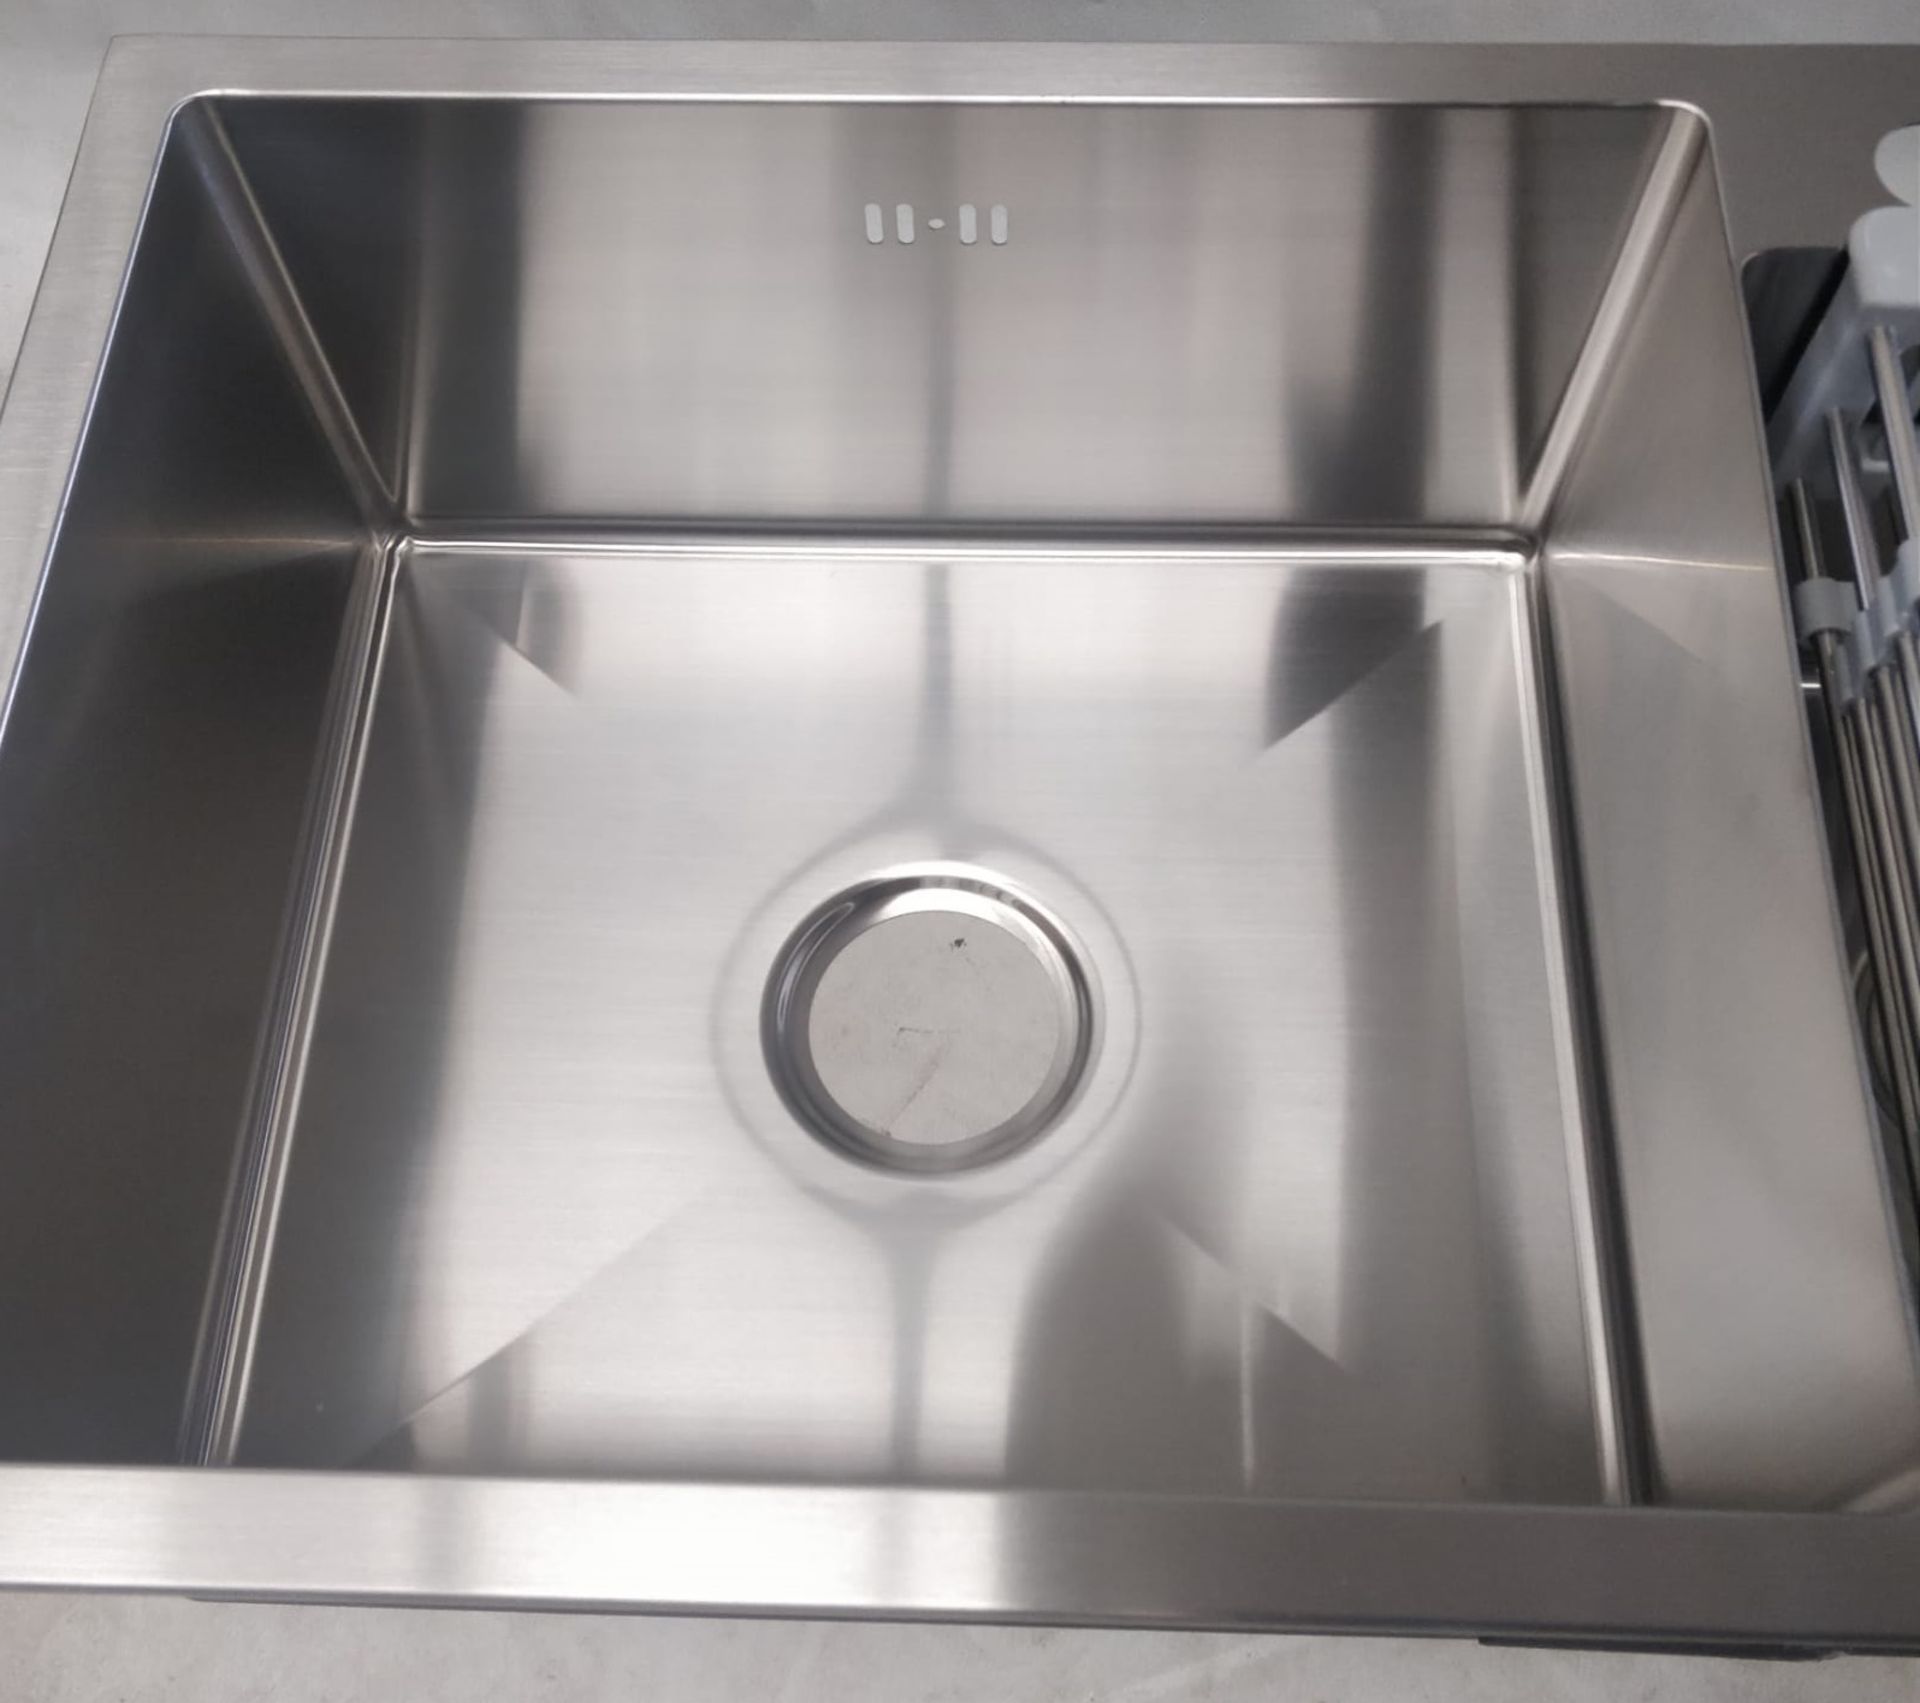 1 x Twin Bowl Contemporary Kitchen Sink Basin - Stainless Steel Finish - Model KS0059 - Includes - Image 7 of 16